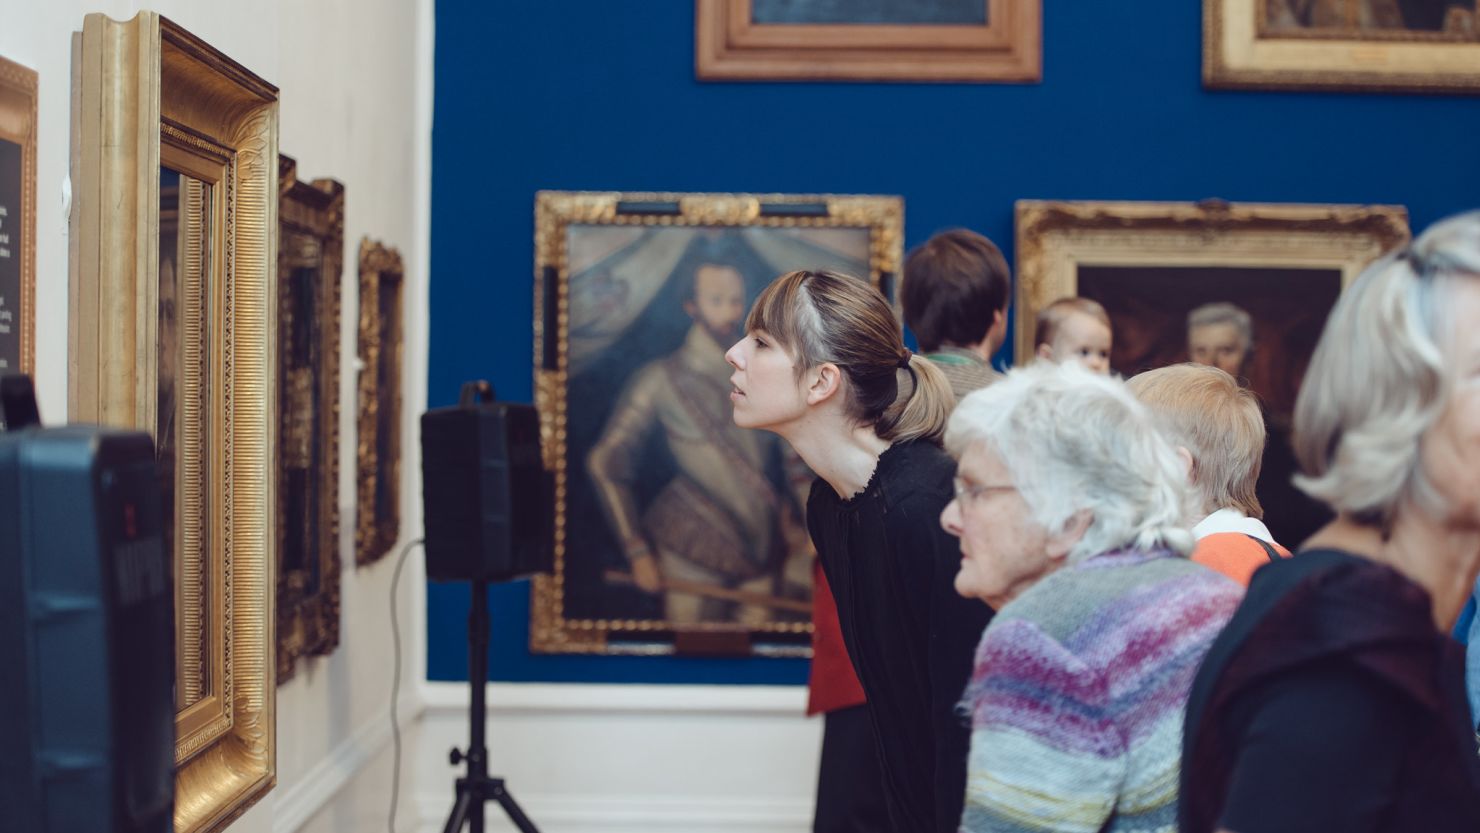 New membership scheme to give exclusive access to exhibitions and events